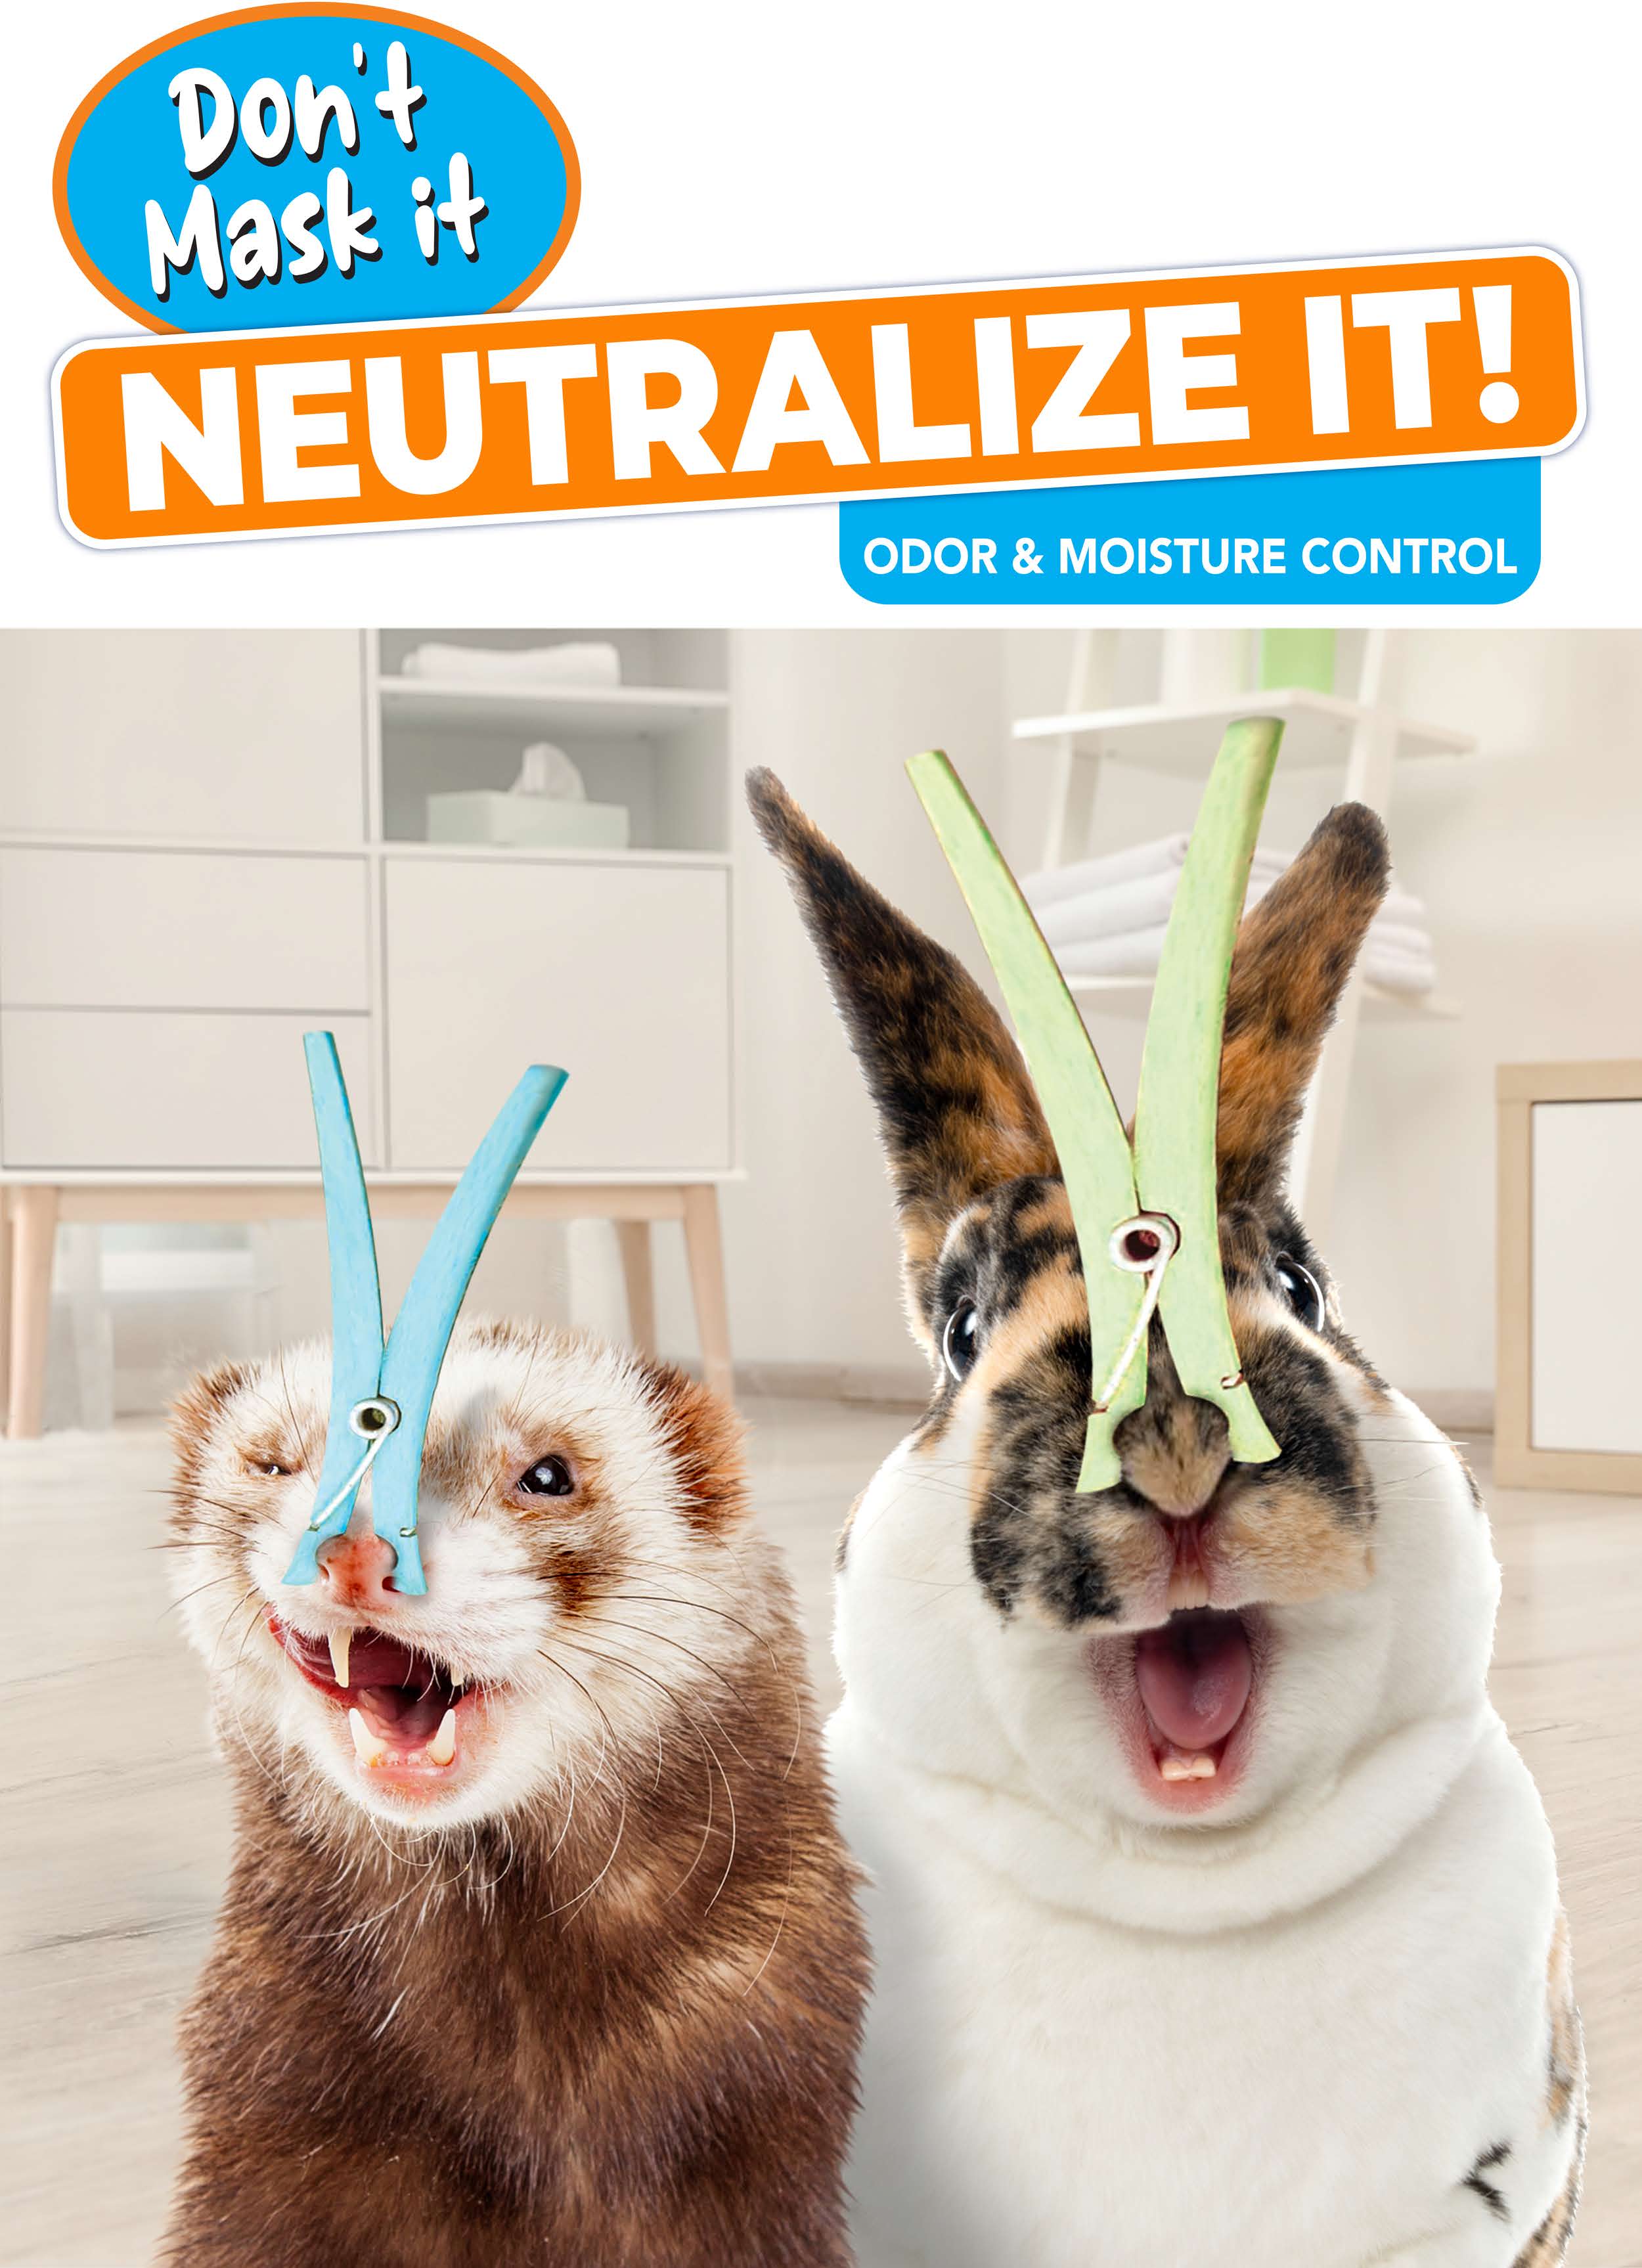 Neutralize It! - Odor and Moisture Control